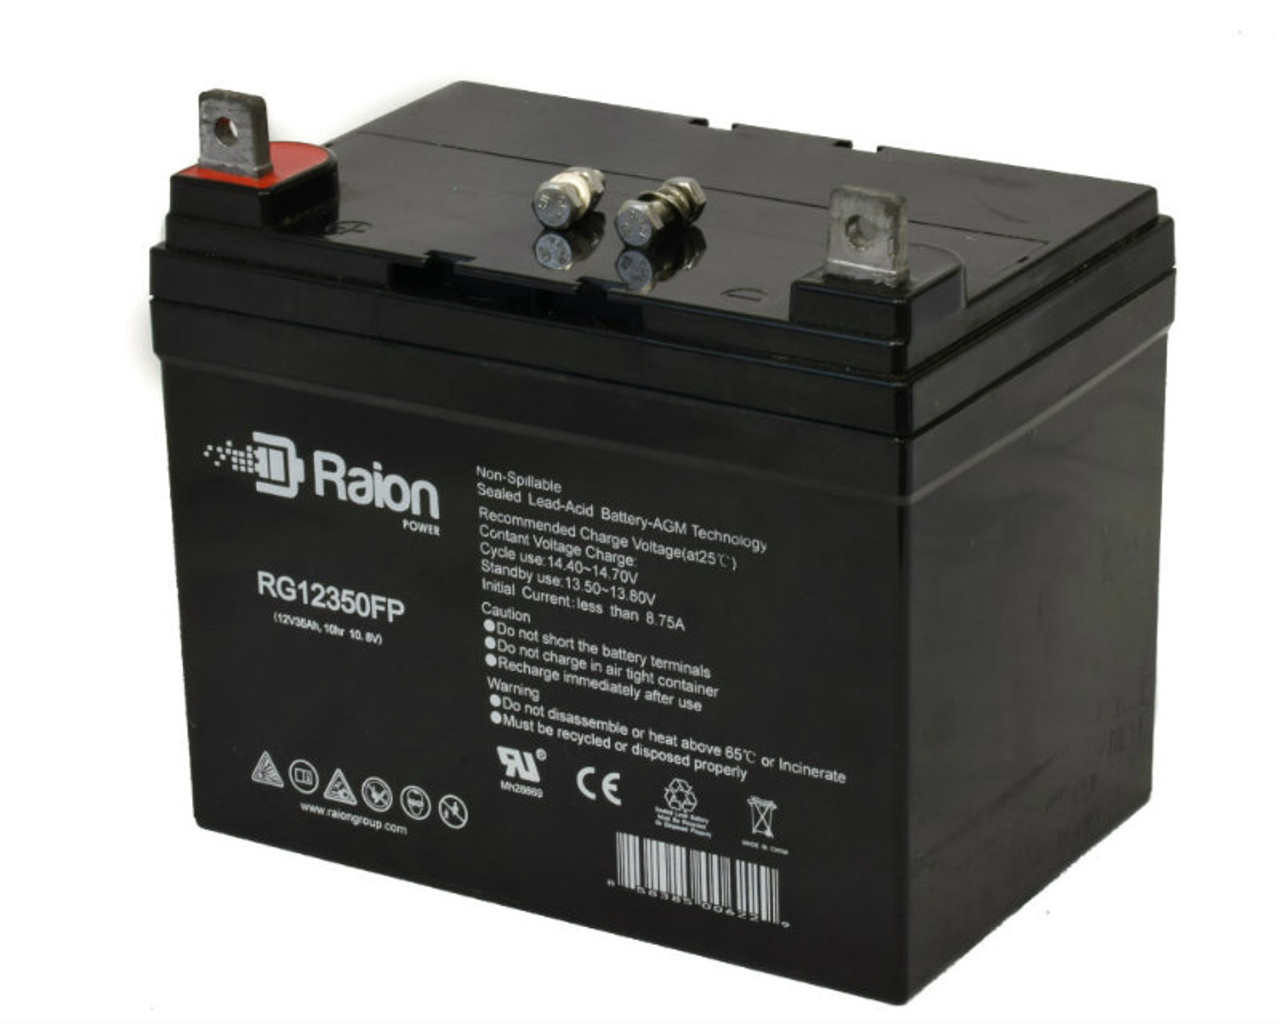 Raion Power Replacement 12V 35Ah RG12350FP Battery for Douglas DBG12032